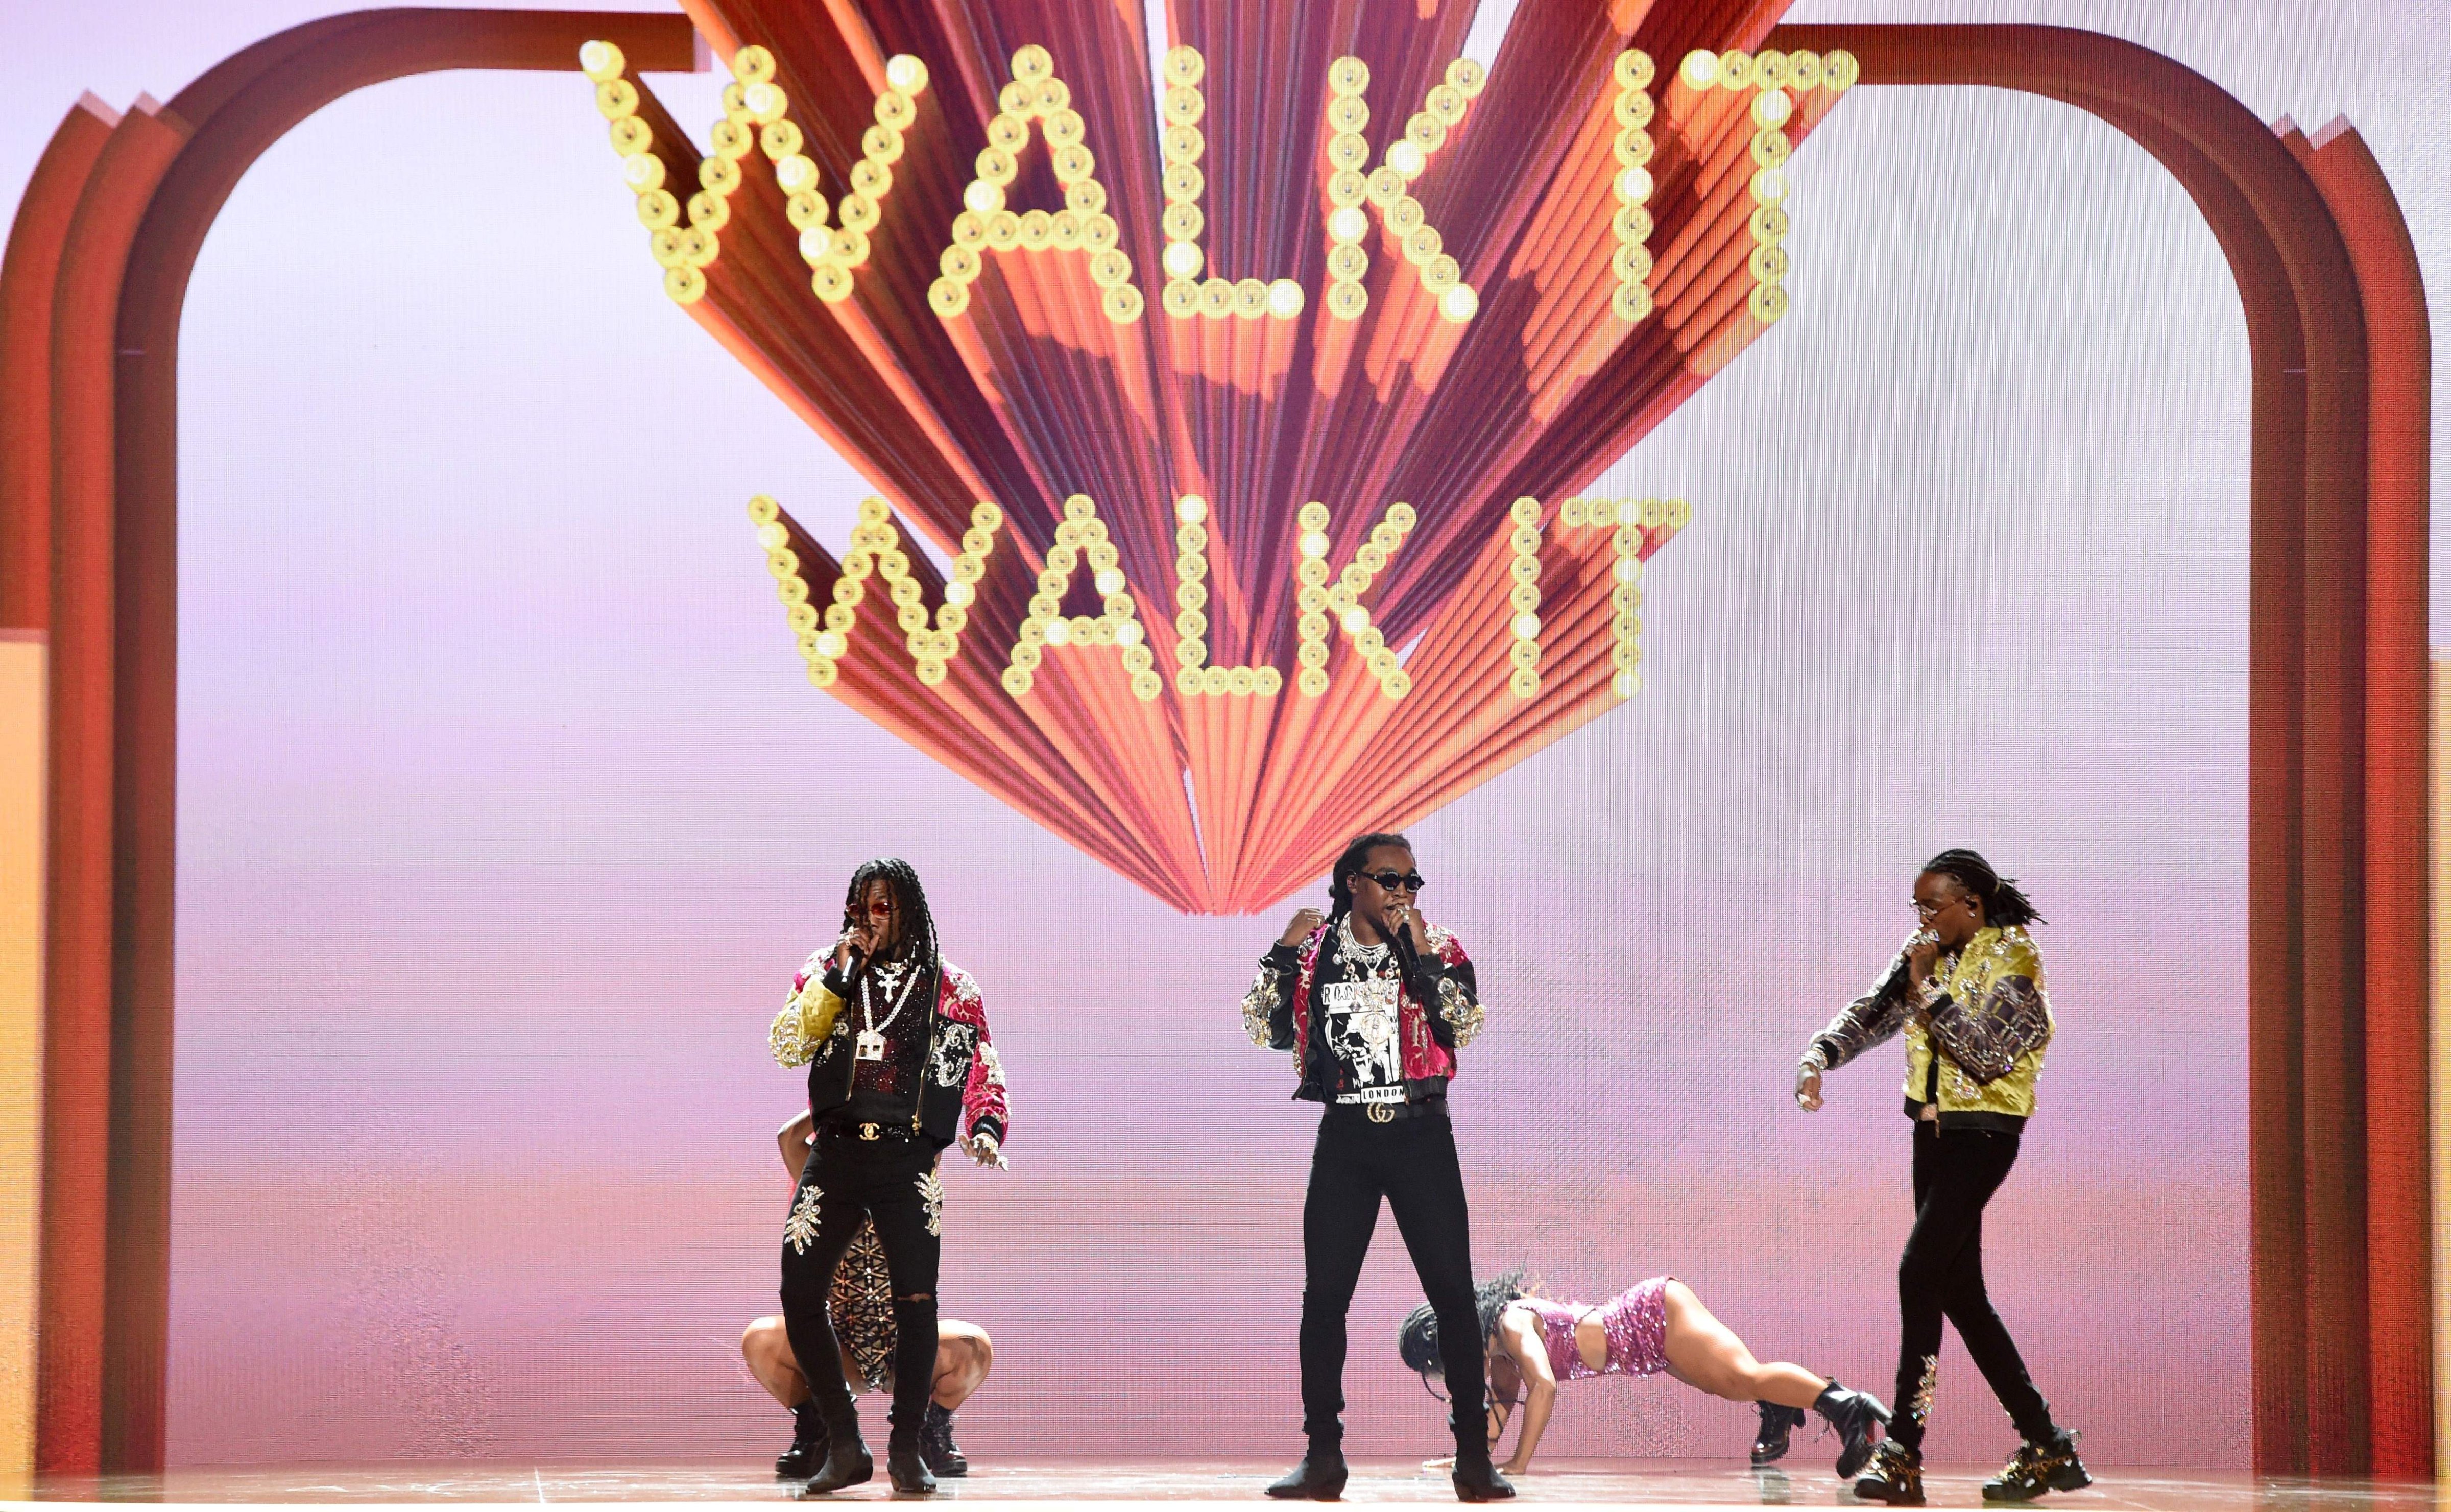 Quavo, Offset, and Takeoff of Migos perform onstage during the BET Awards at Microsoft Theatre in Los Angeles, Calif., on June 24, 2018. (Valerie Macon—AFP/Getty Images)